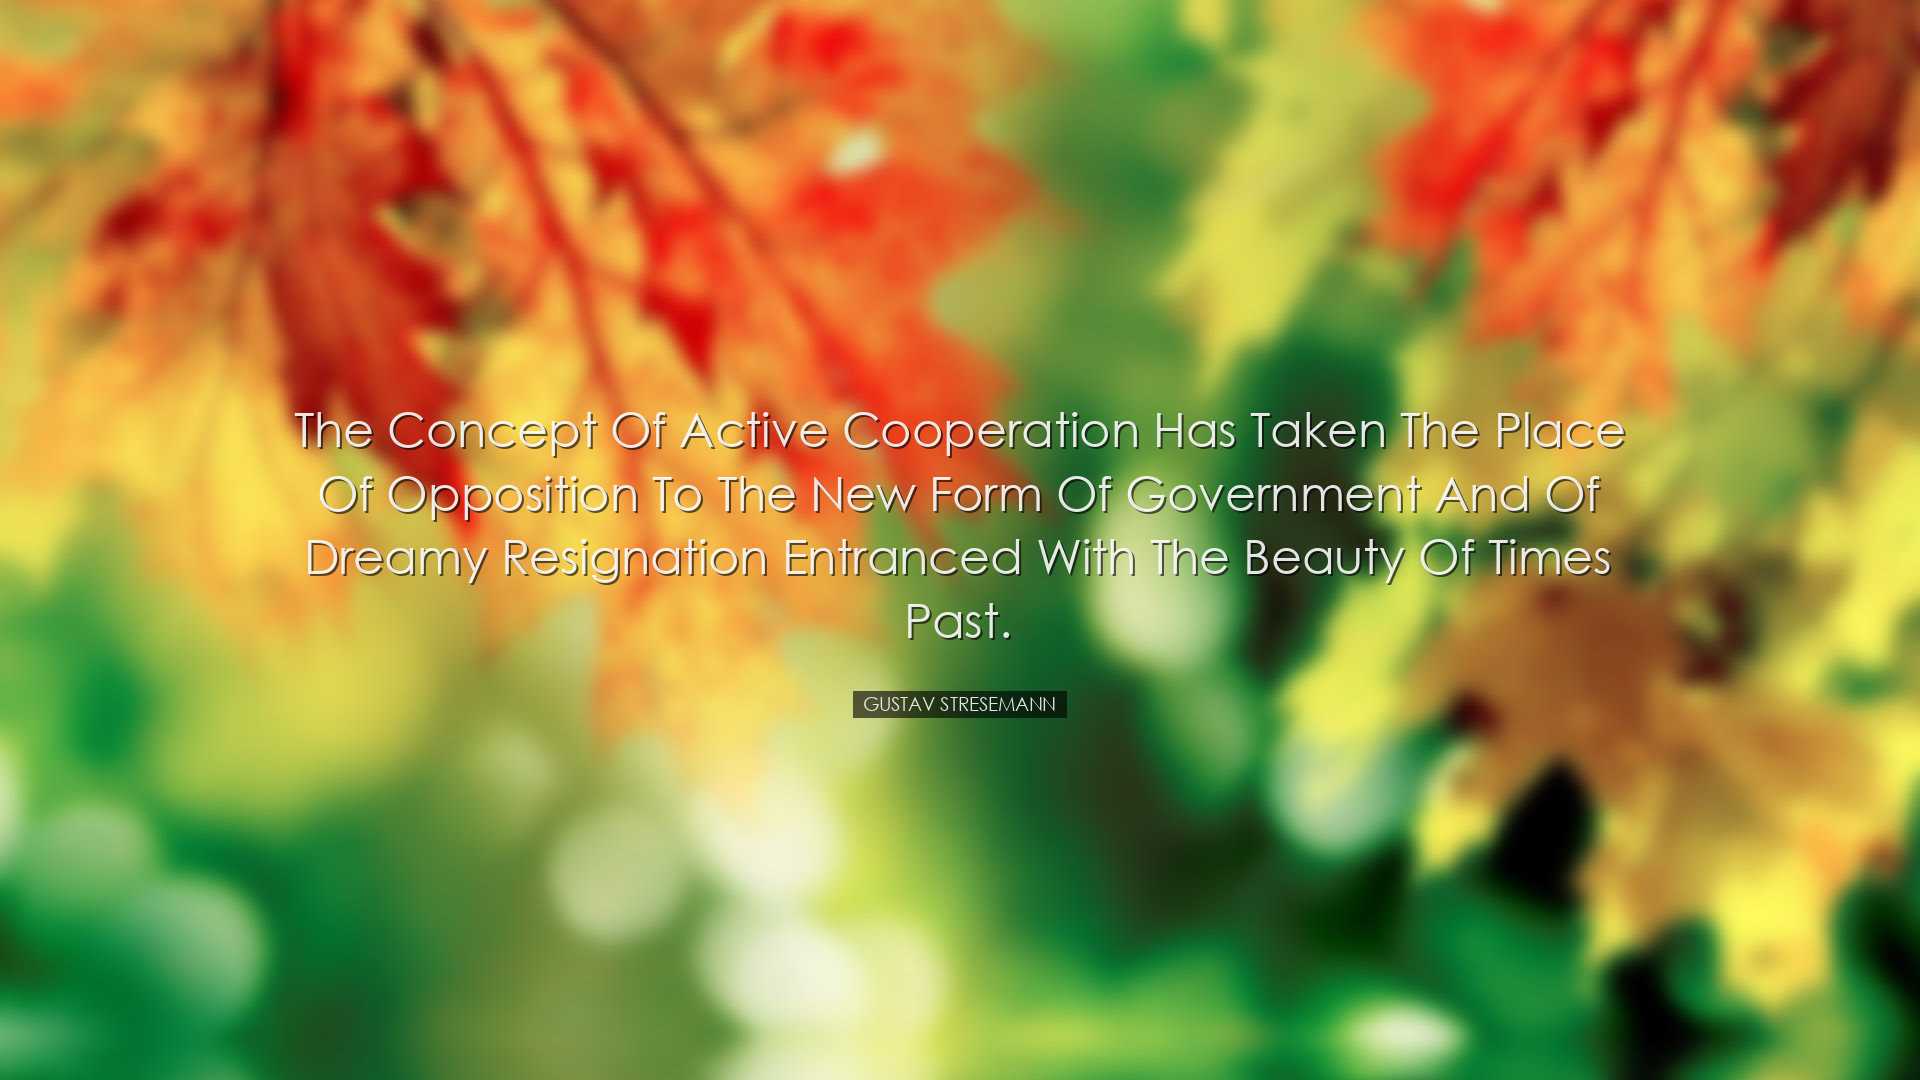 The concept of active cooperation has taken the place of oppositio